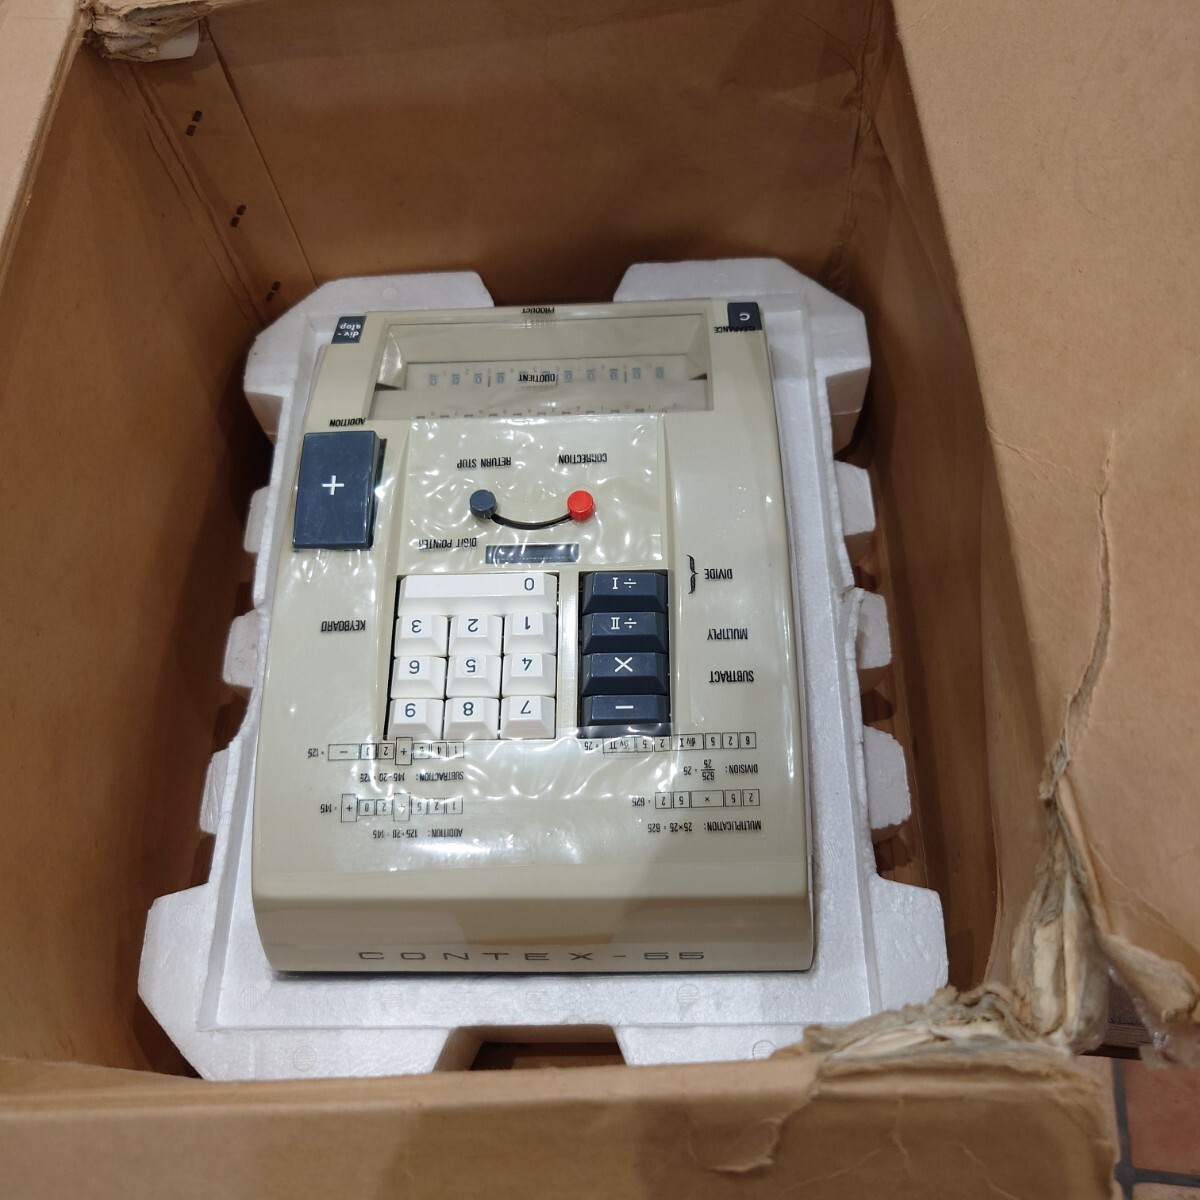 k430.3 operation verification settled Denmark made old electric count machine CONTEX-55 count machine original box instructions attaching 